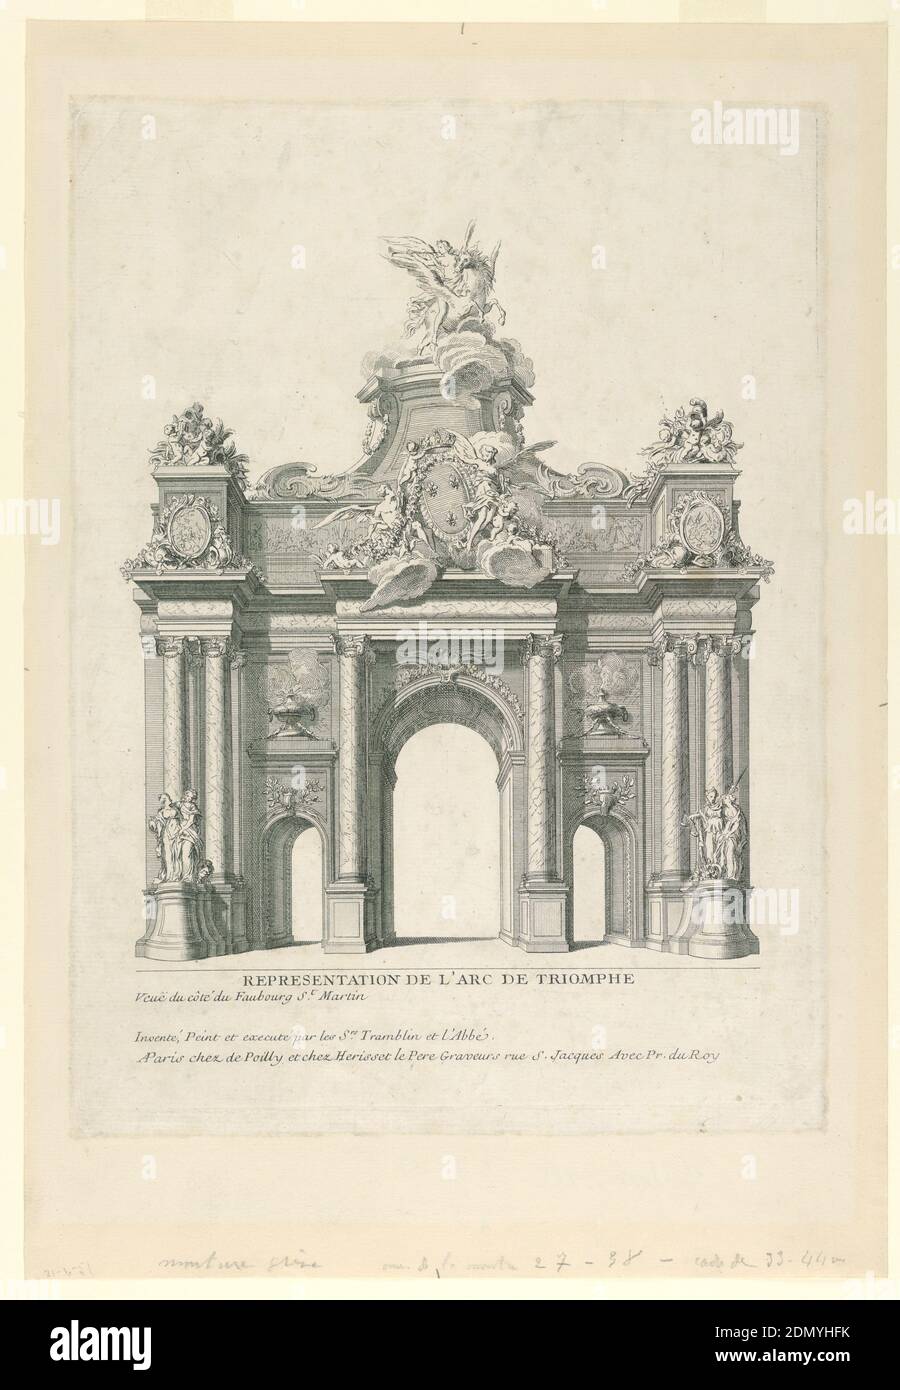 Elevation of a Temporary Trumphal Arch, Nicolas Jean-Baptiste de Poilly, French, 1712–after 1758, Antoine Hérisset, French, 1685 - 1769, Charles André Tramblin, French, active mid-18th century, Joseph Labbé, Etching with engraved parts on paper, Arch erected on account of a festive happening in the Royal family. Arch with three openings, showing in the center of the attic a royal French coat of arms, animals, and puttos, and on top a statue of a genius on Pegasus., France, ca. 1750, Print Stock Photo